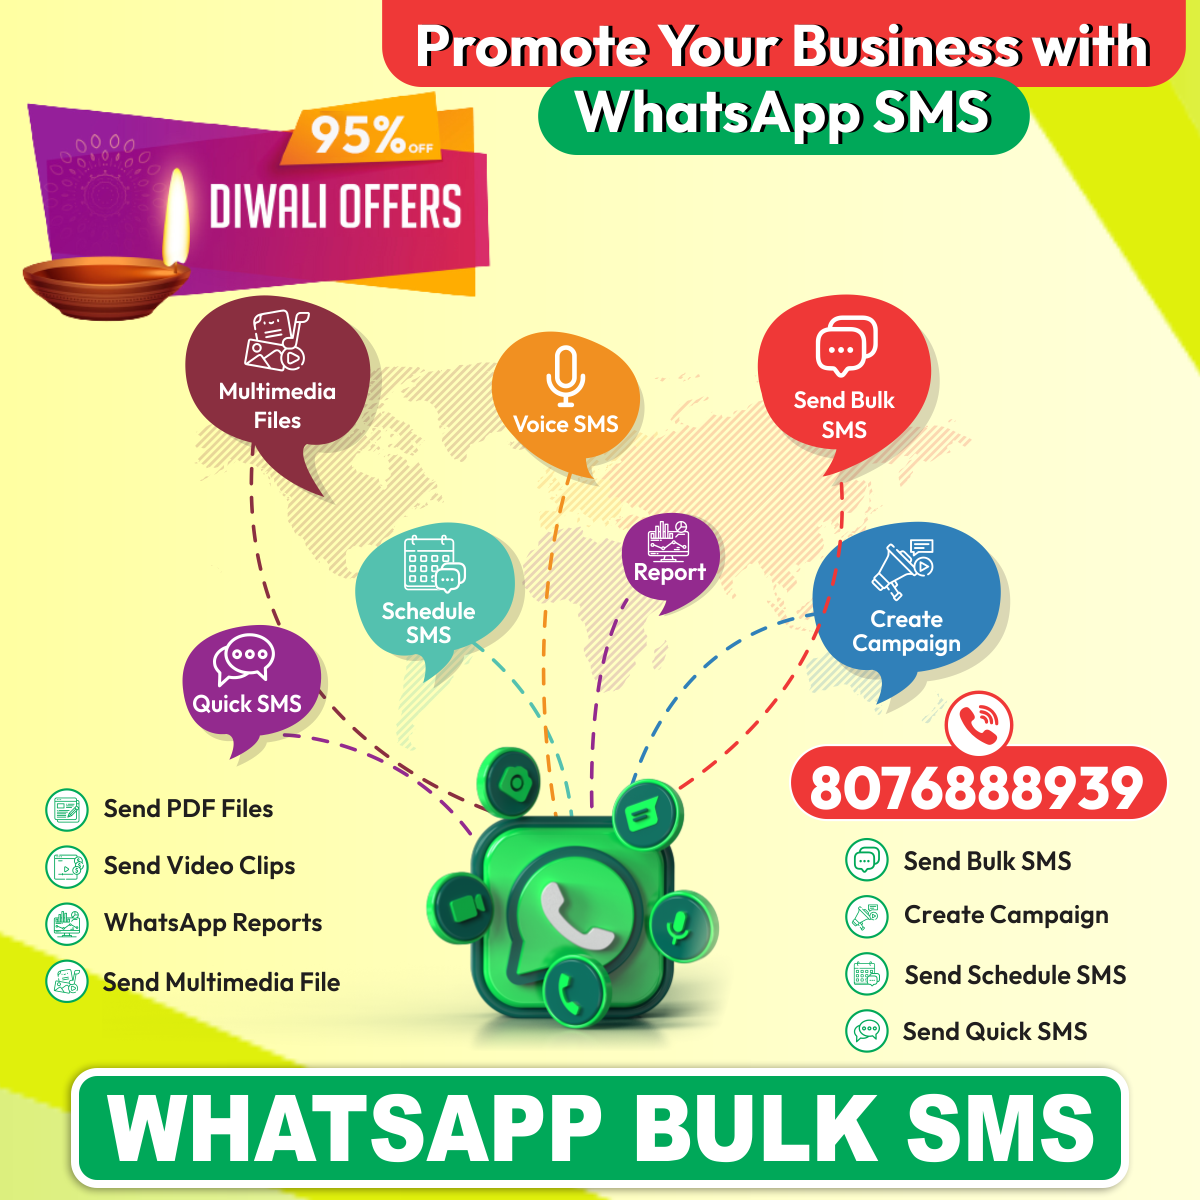 WhatsApp Bulk SMS Services – Affordable Price, Promote Your Business Using WhatsApp Bulk SMS